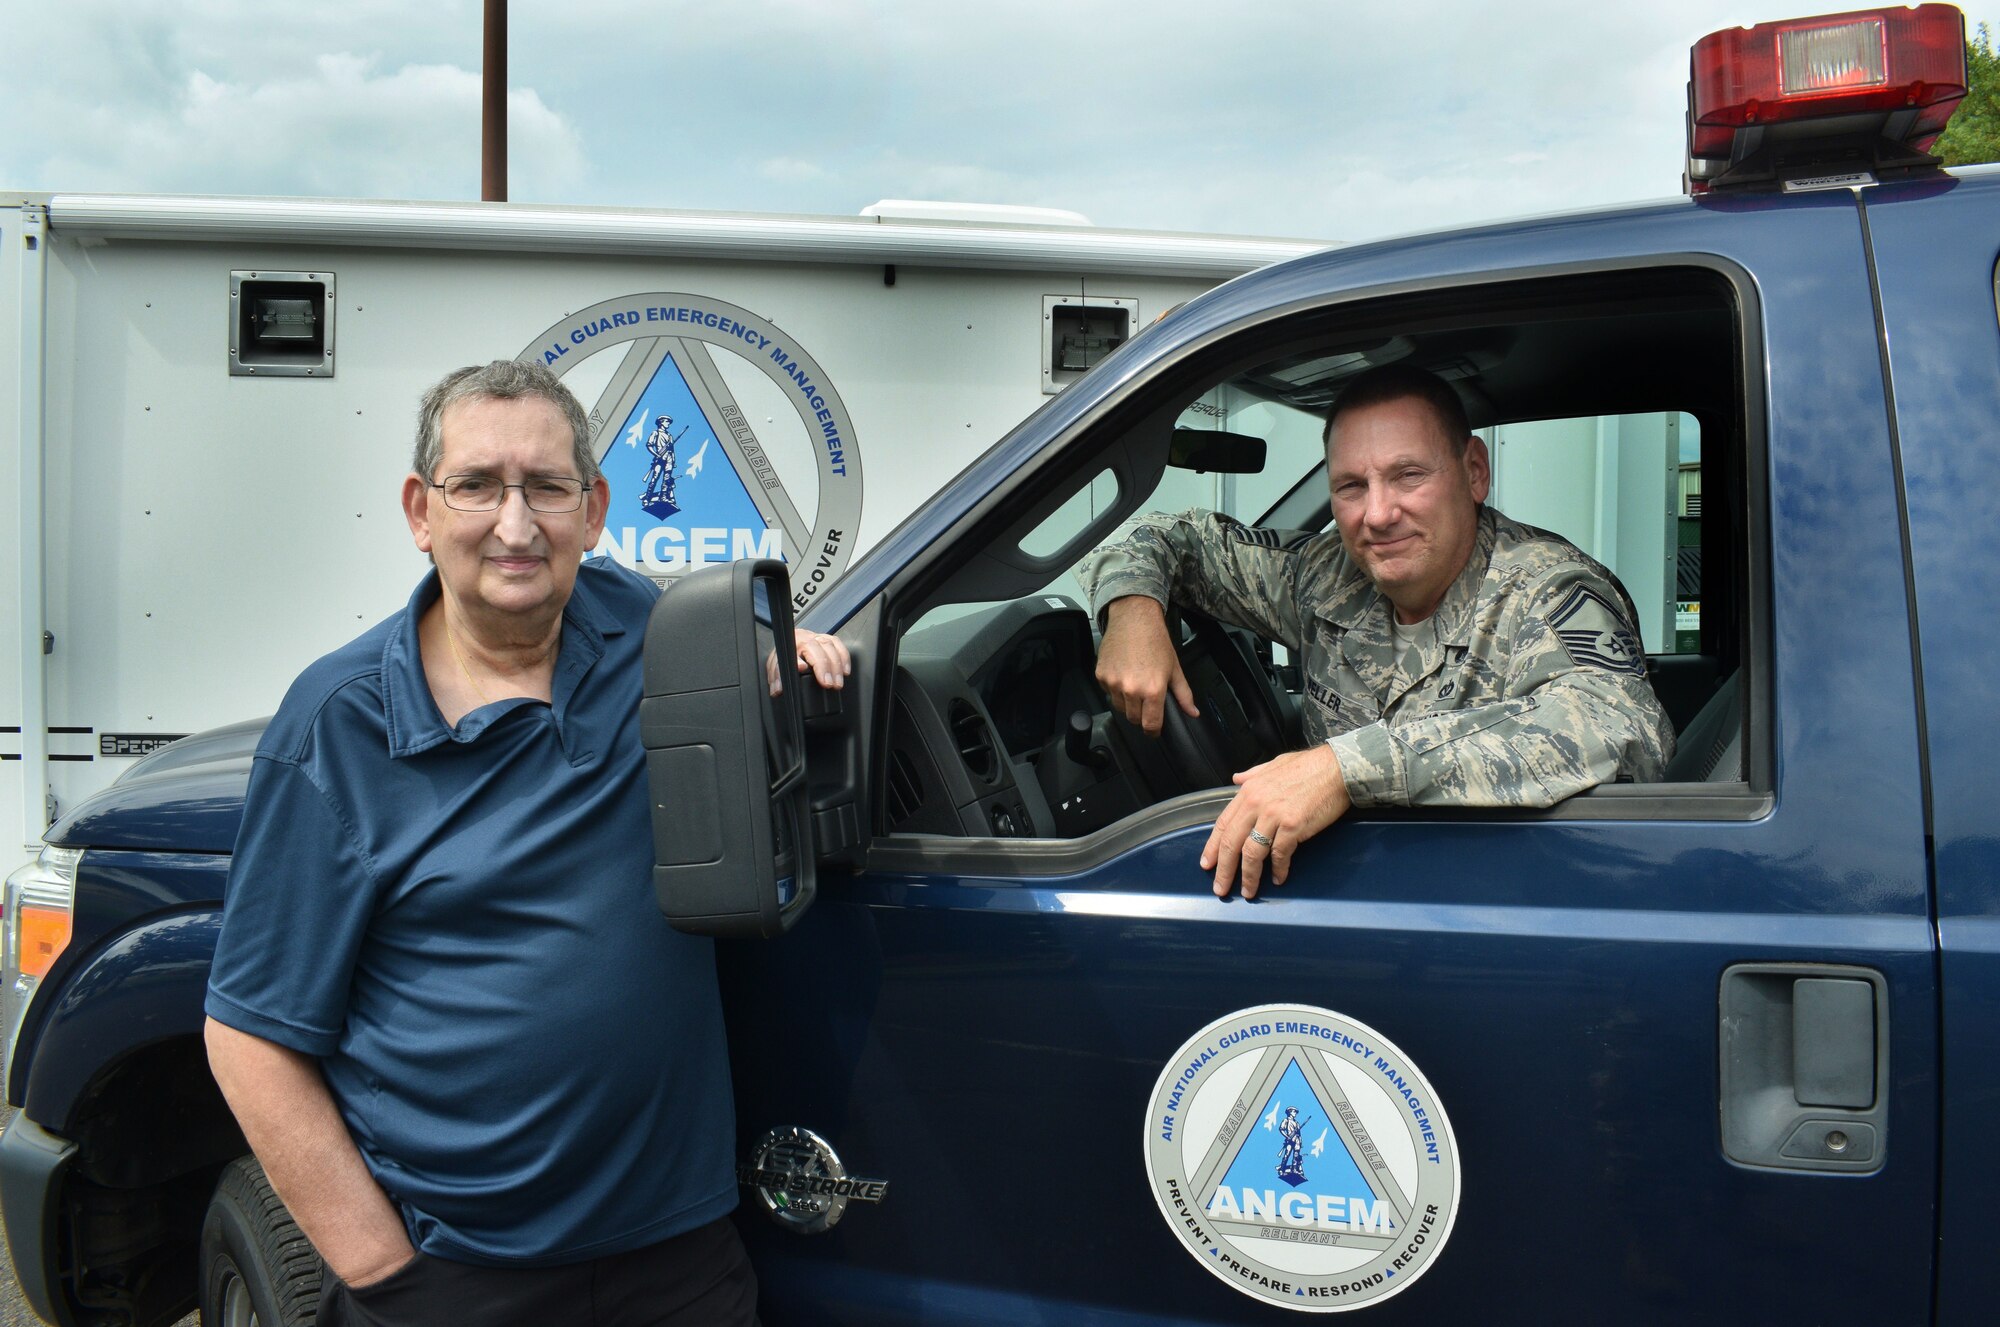 John Hertler (left), a chemical biological radiological and nuclear program specialist assigned to the Horsham Air Guard Station, Pennsylvania Air National Guard, and Senior Master Sgt. James Weller (right), the emergency manager assigned to the Horsham AGS, take a break from moving their emergency response vehicle to pose for a photo during Emergency Preparedness Month here Sept. 12, 2019. National Preparedness Month promotes family and community disaster and emergency planning. (U.S. Air National Guard Photo by Senior Airman Wil Acosta)